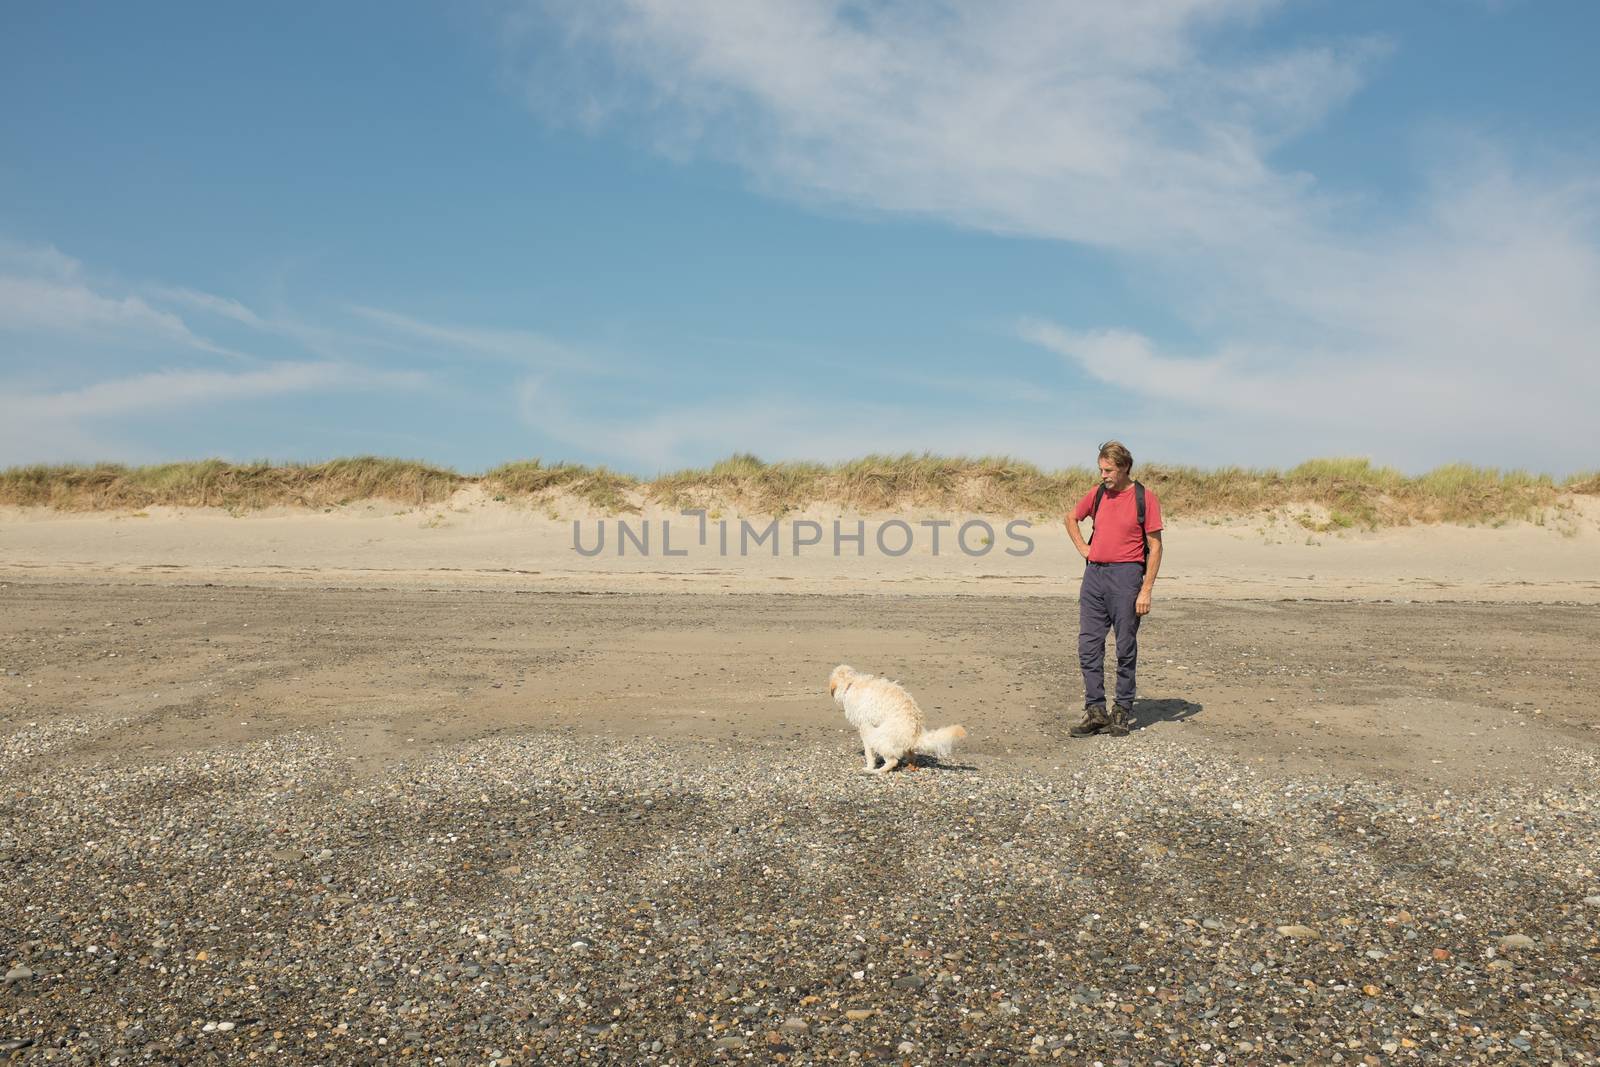 A dog, ladradoodle, defecates on a beach with a man, owner, watching.